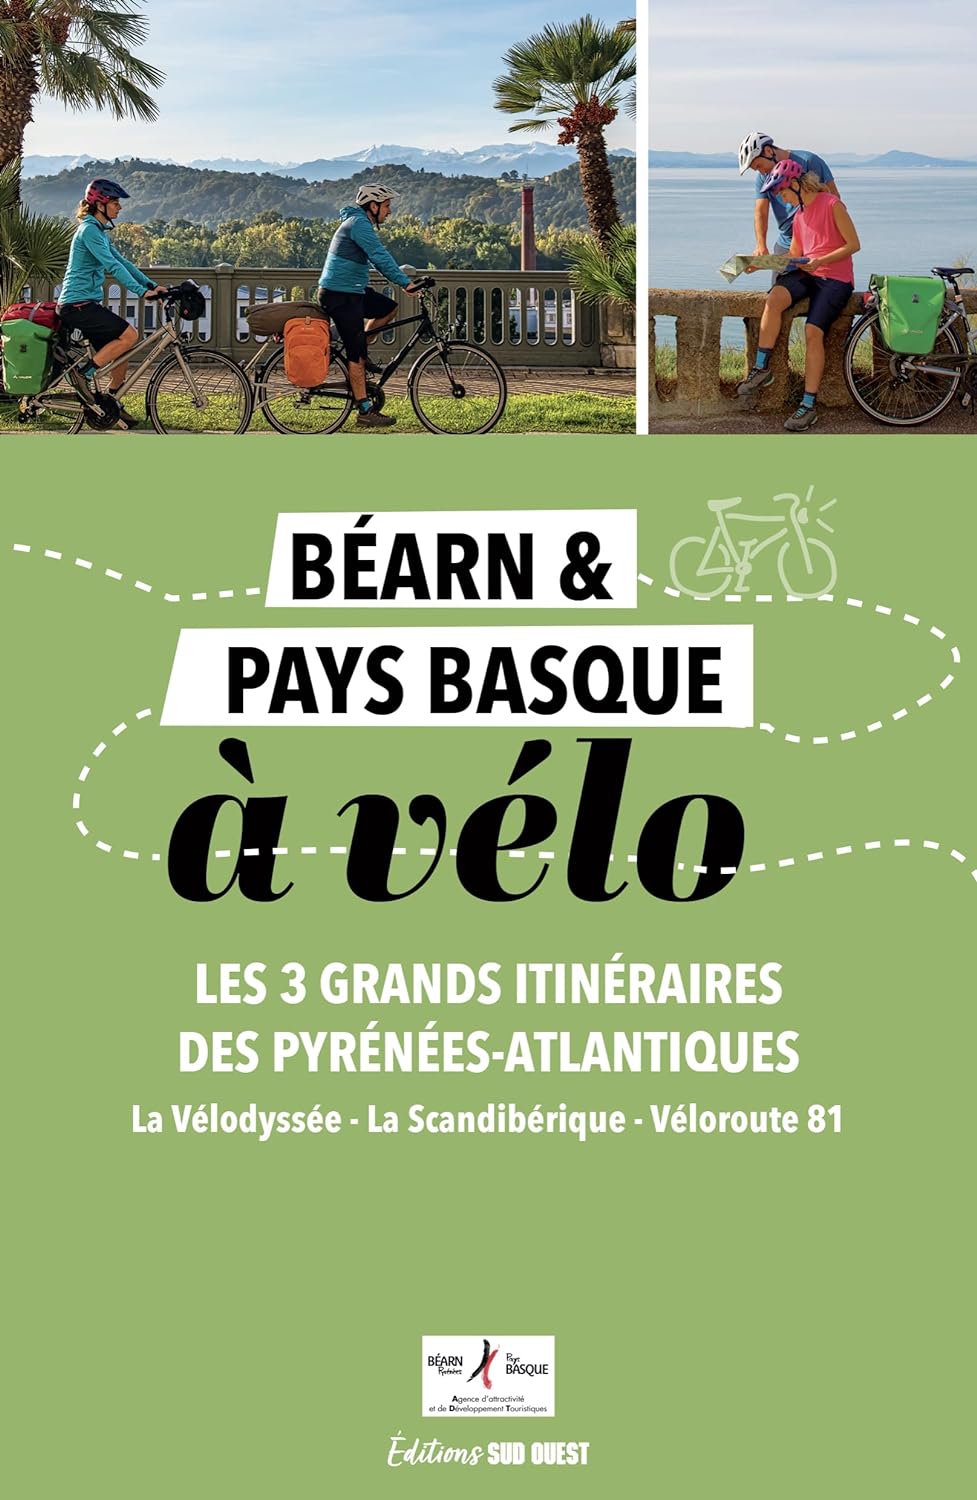 Cycling guide - Béarn and Basque Country by bike, the 3 major routes of the Pyrénées-Atlantiques | South West